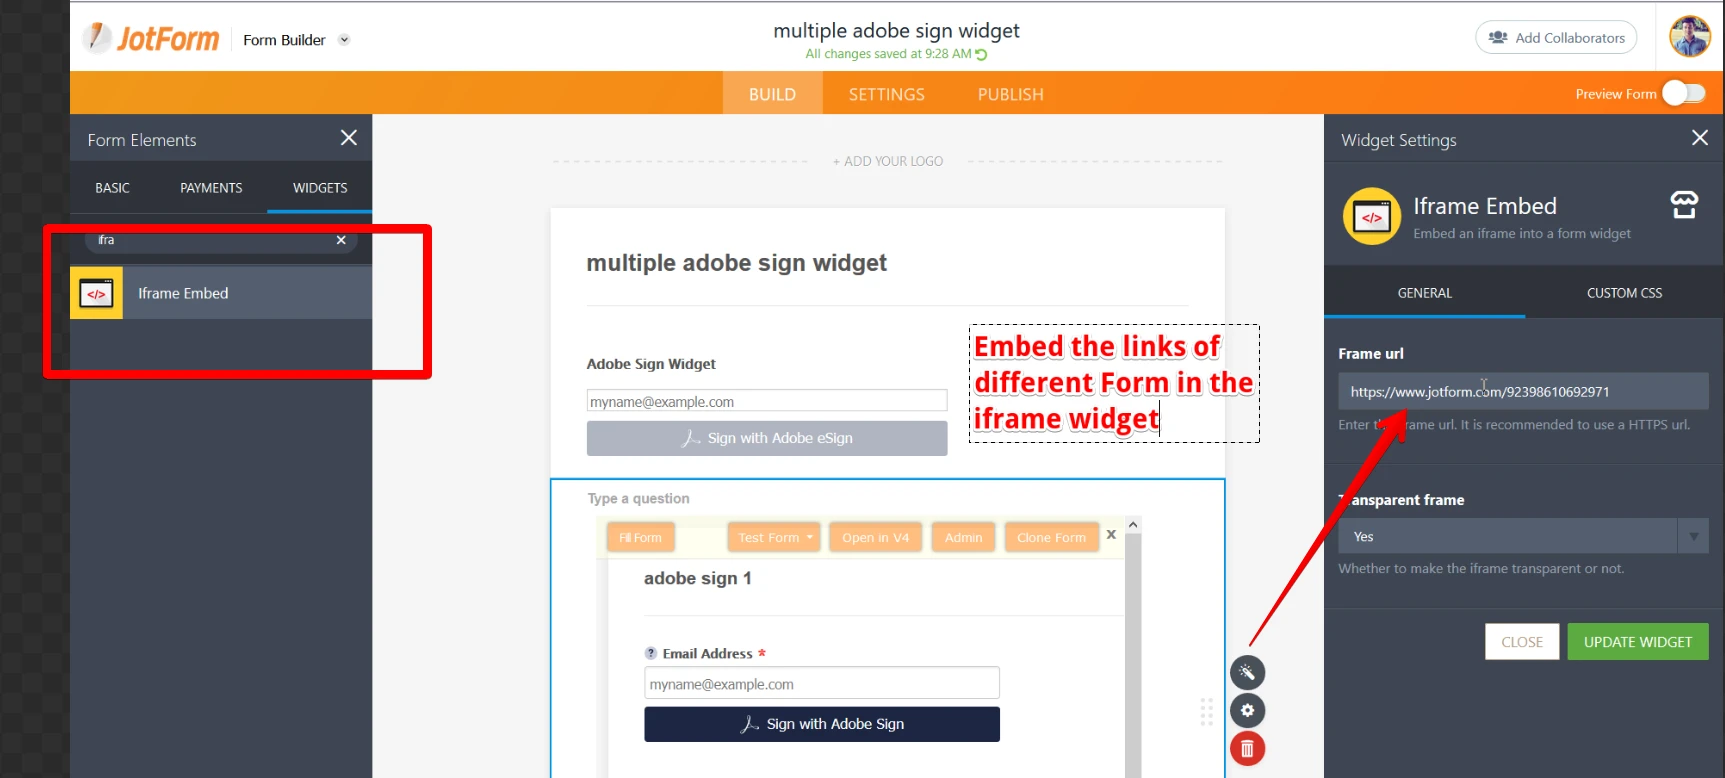 How does AdobeSign works for multiple signatories and multiple form administrators? Image 32